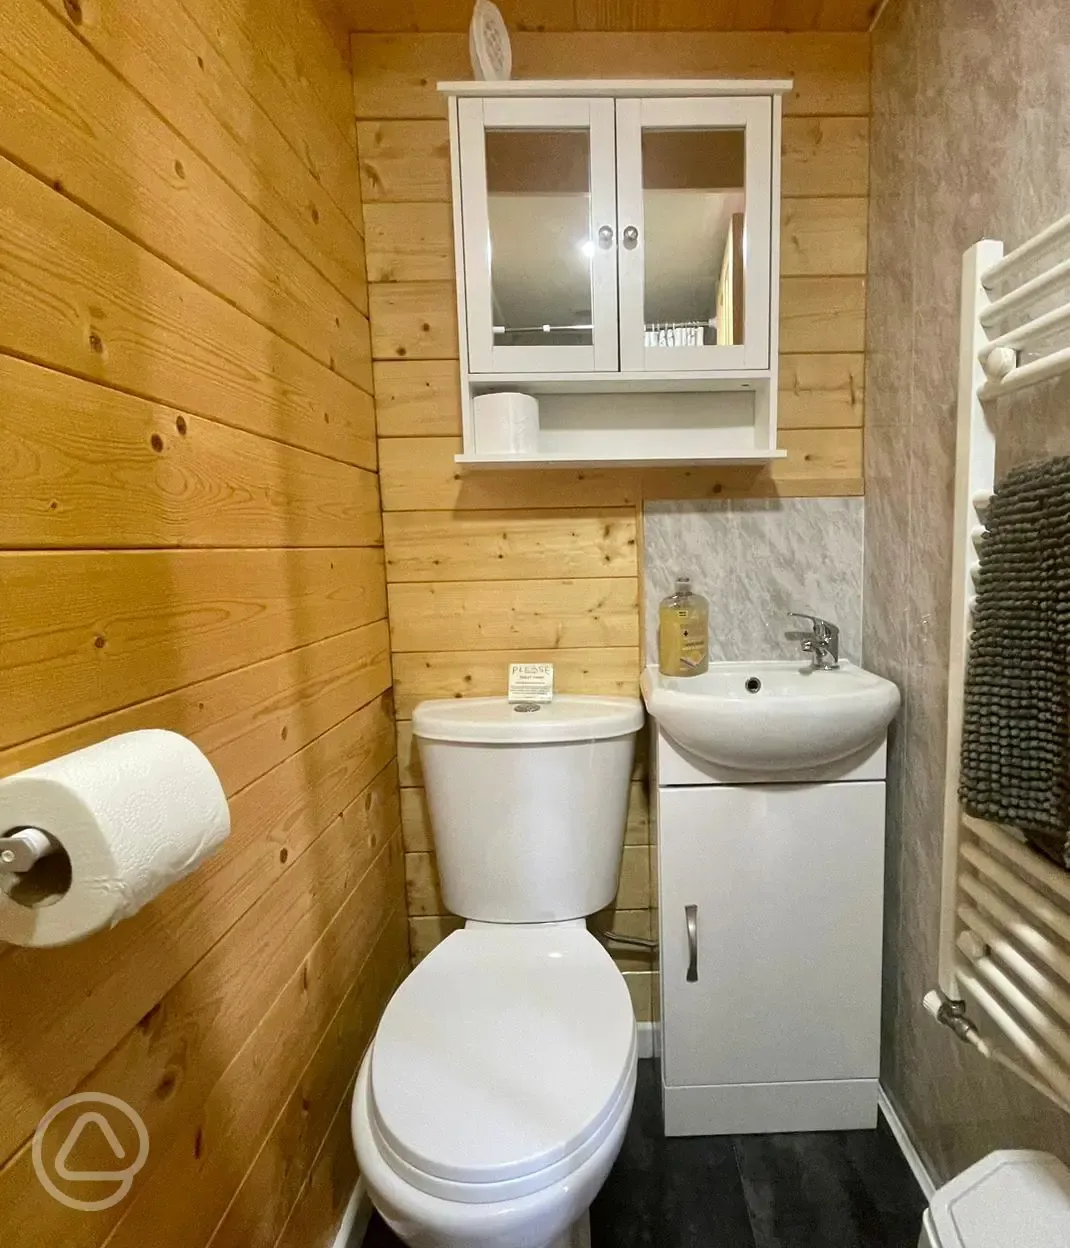 En-suite with flushing toilet